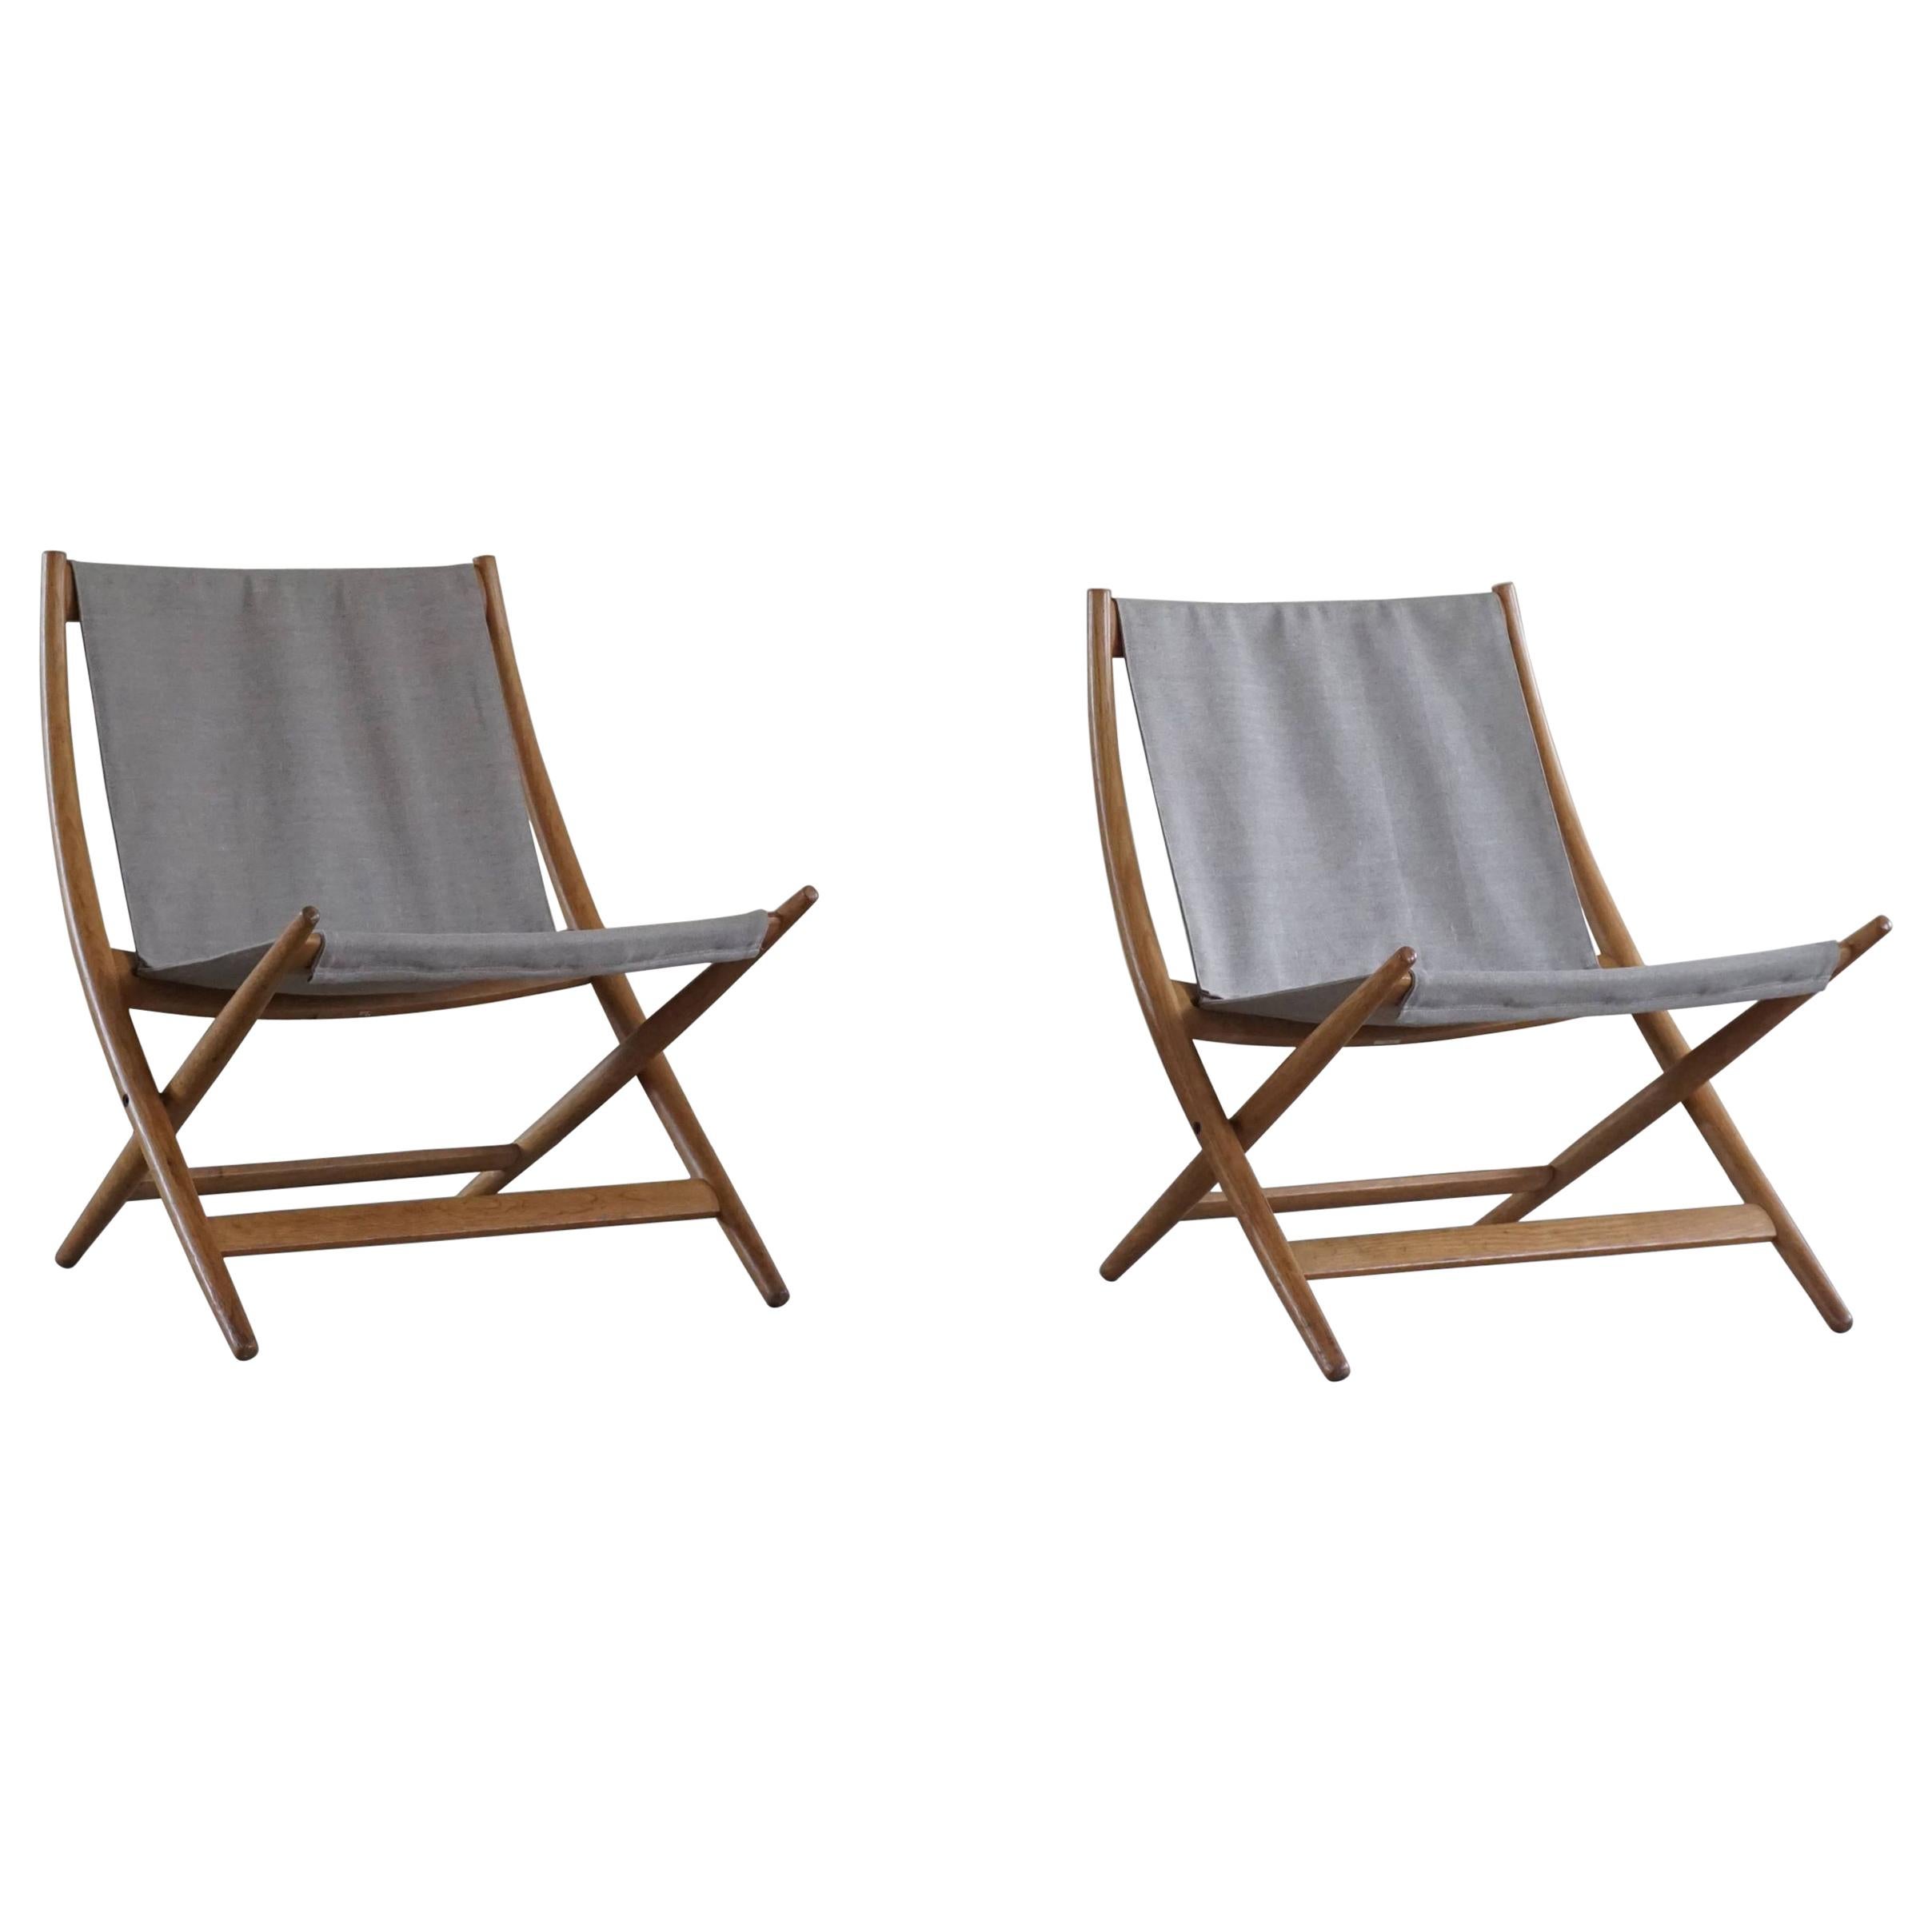 Pair of Danish Modern Folding Chairs by Johan Hagen in Oak and Canvas, 1958